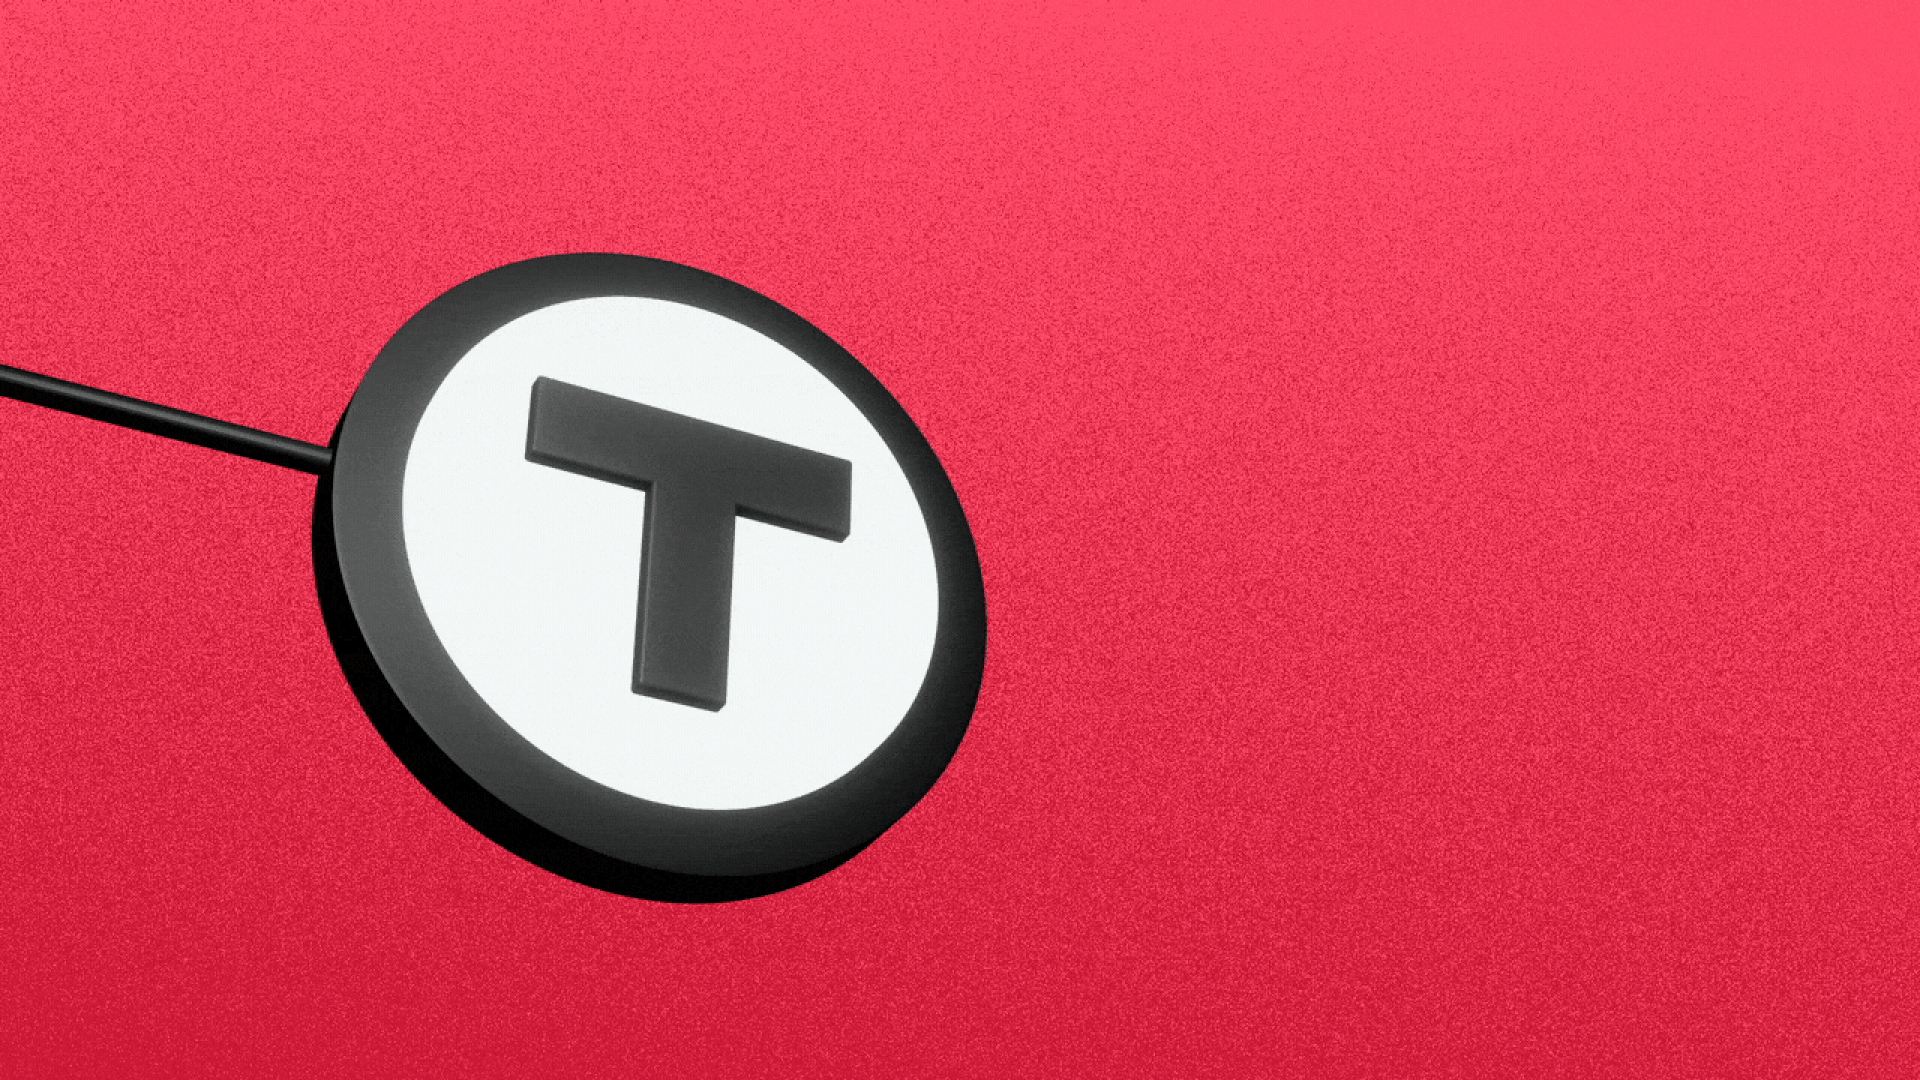 Illustration of an MBTA sign changing into an emergency symbol.